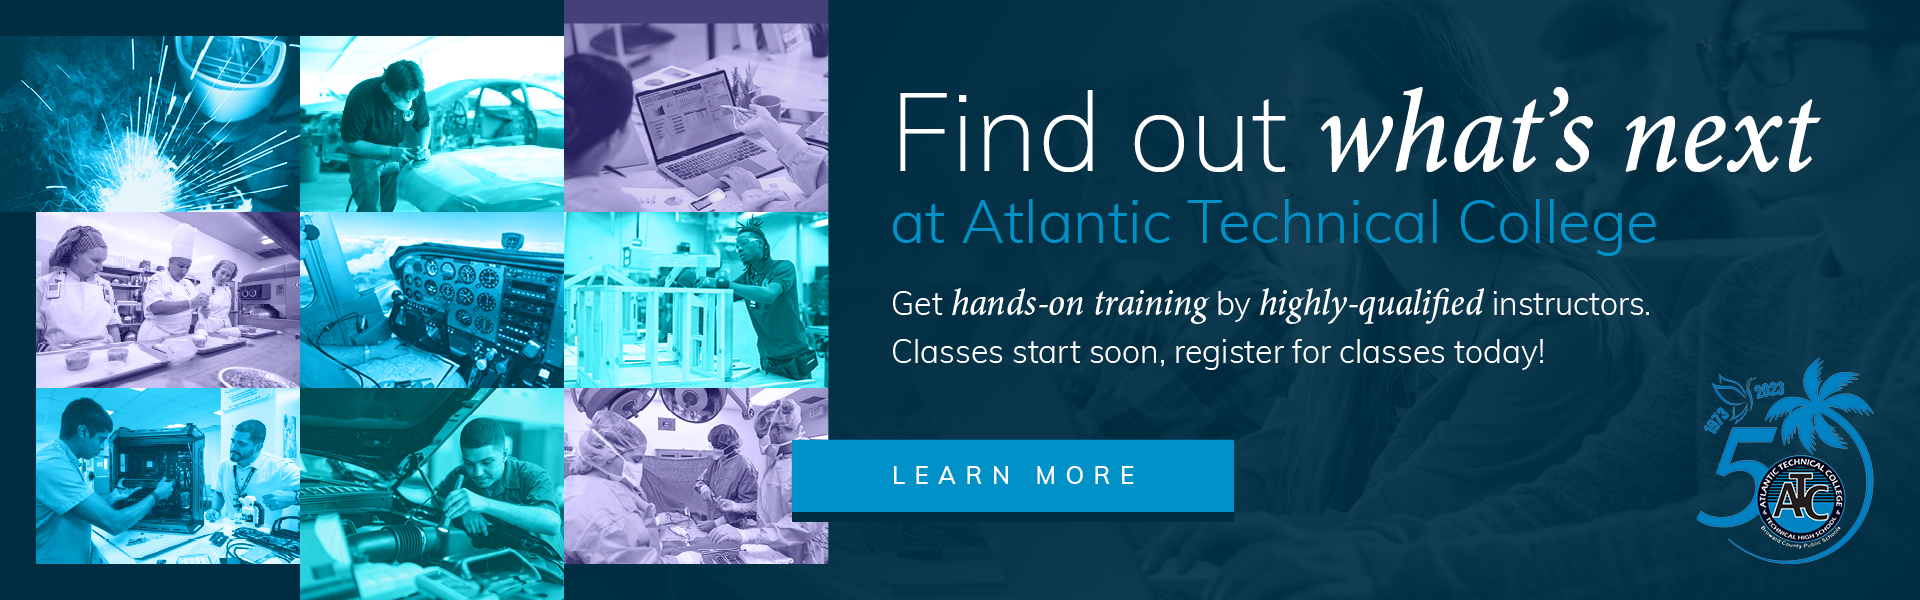 find out what's next at Atlantic Technical College